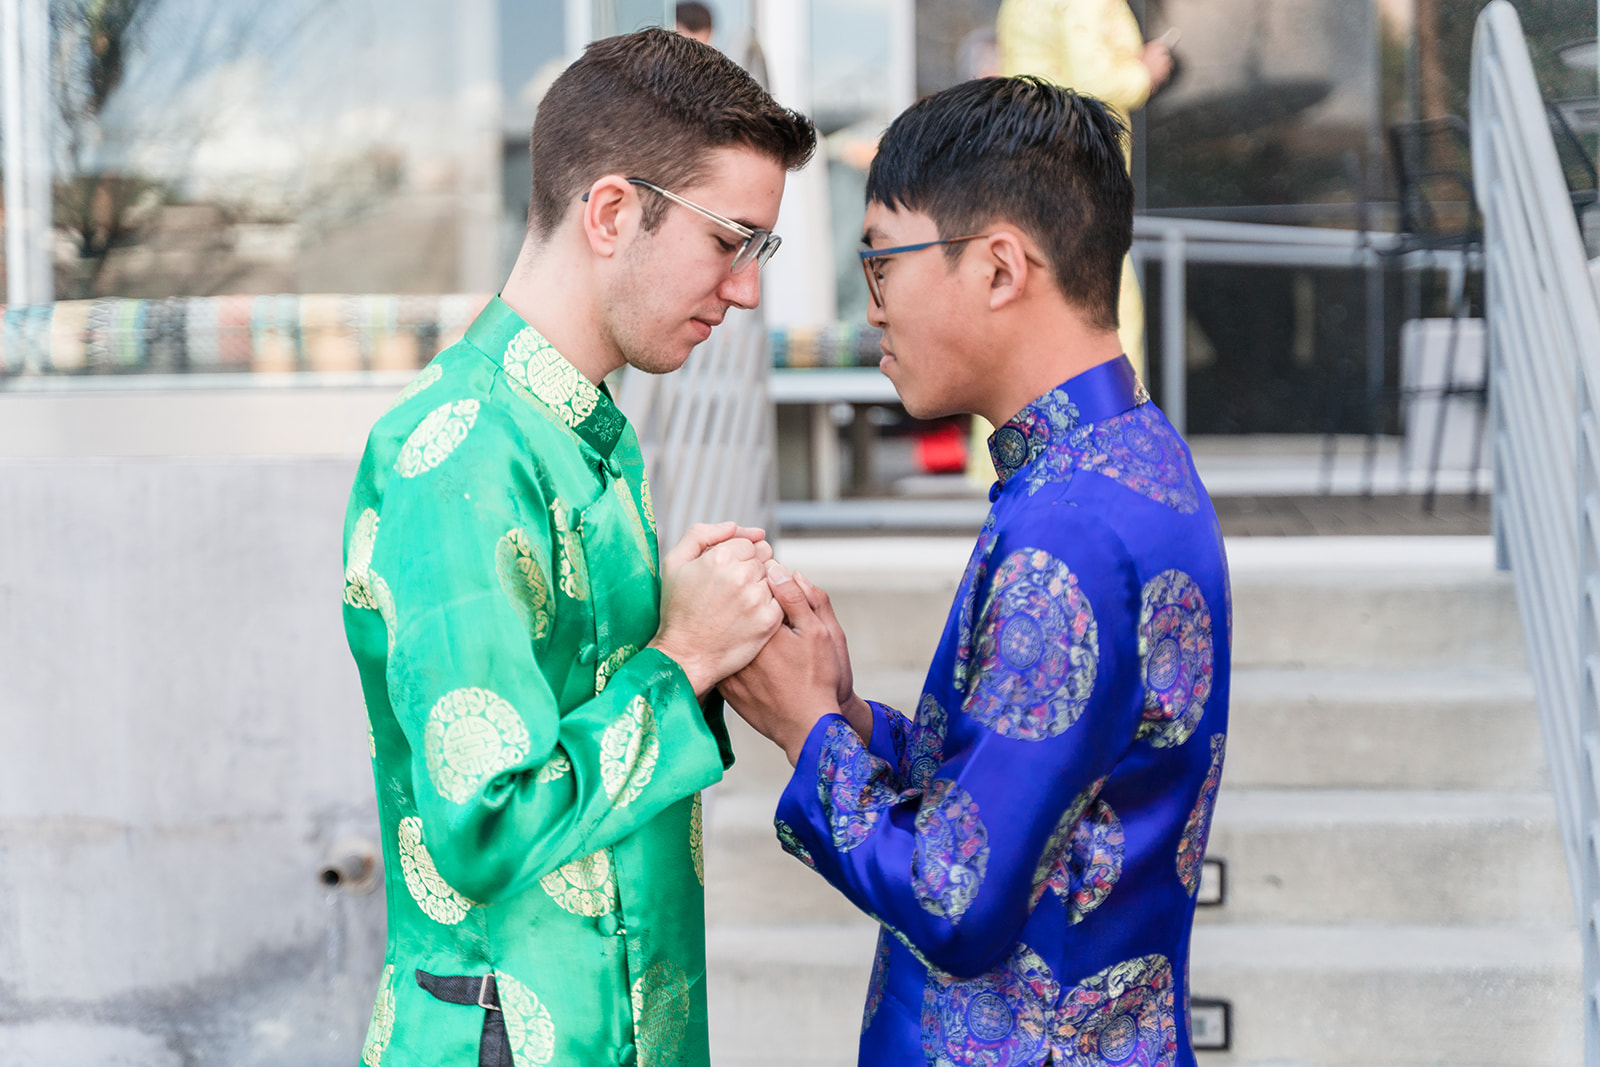 Two grooms embrace each other tenderly, holding hands in a gesture of love and devotion.